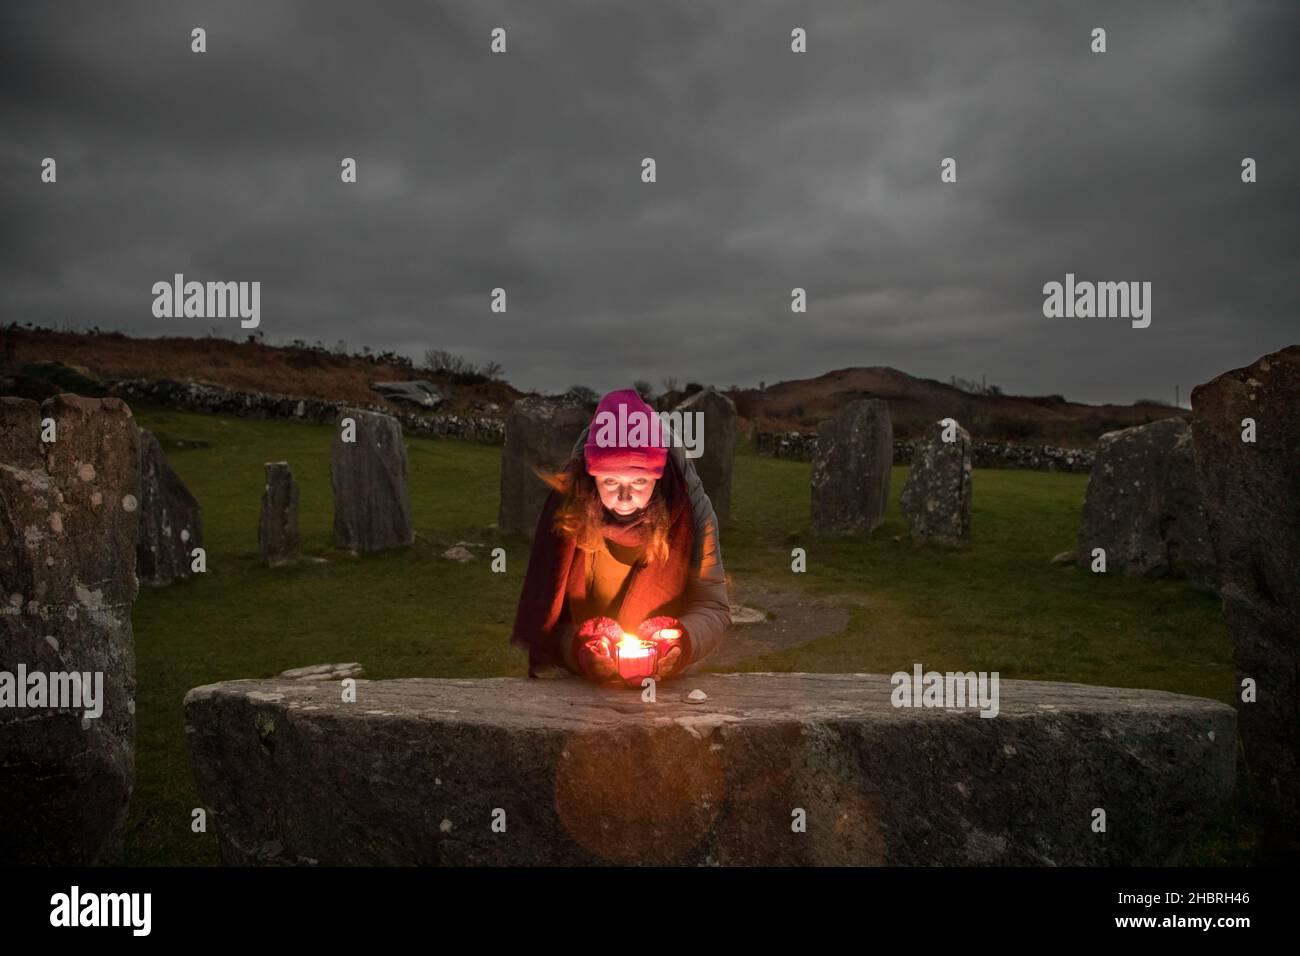 Drombeg, Glandore, Cork, Ireland. 21st December 2021.Shaman and healer Amy Russell from Rosscarbery lighting a candle on the Altar Stone while  waiting to observe the Sunrise during the Winter solstice at Drombeg Stone Circle outside Glandore, County Cork, Ireland. - Credit; David Creedon / Alamy Live News Stock Photo